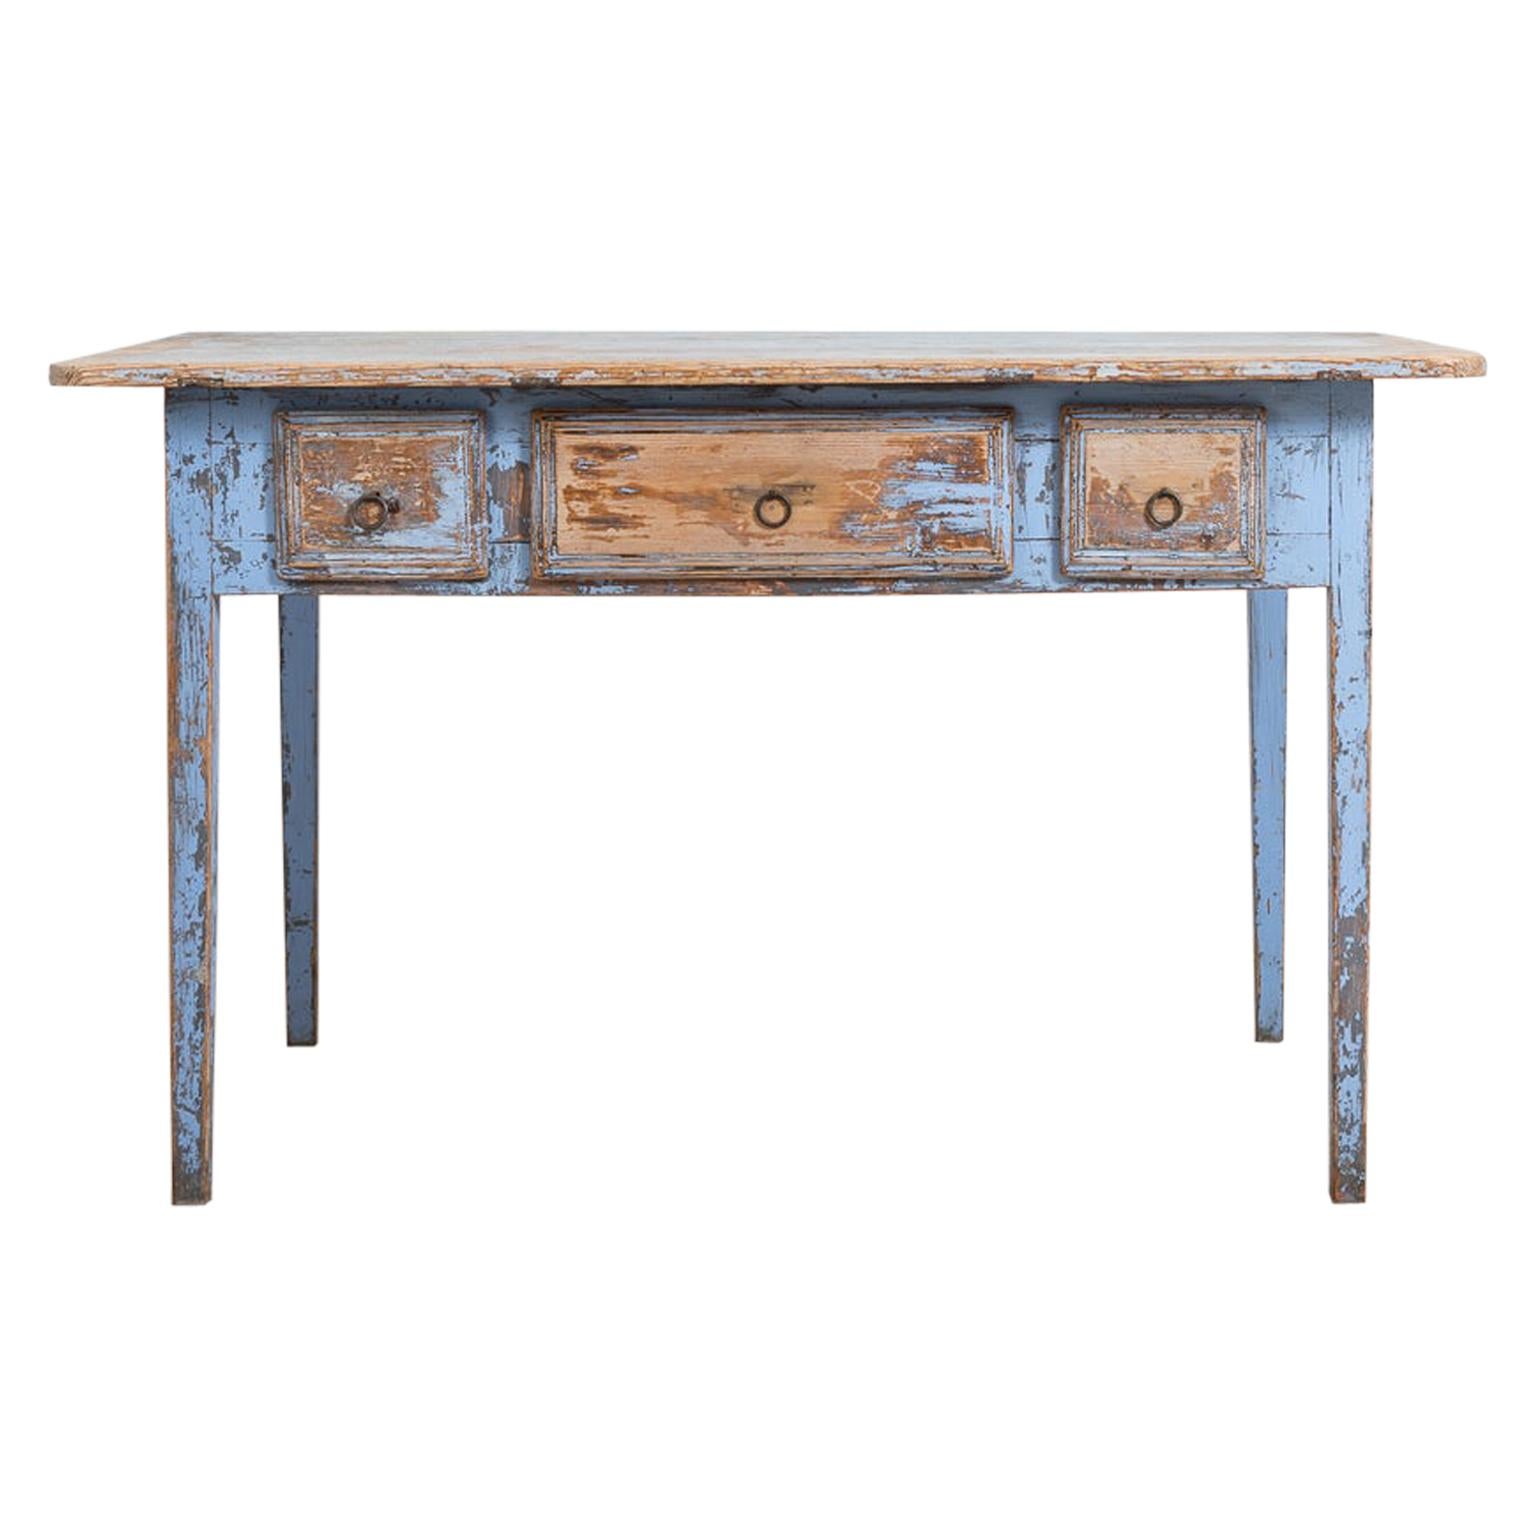 Early 19th Century Swedish Gustavian Painted Table